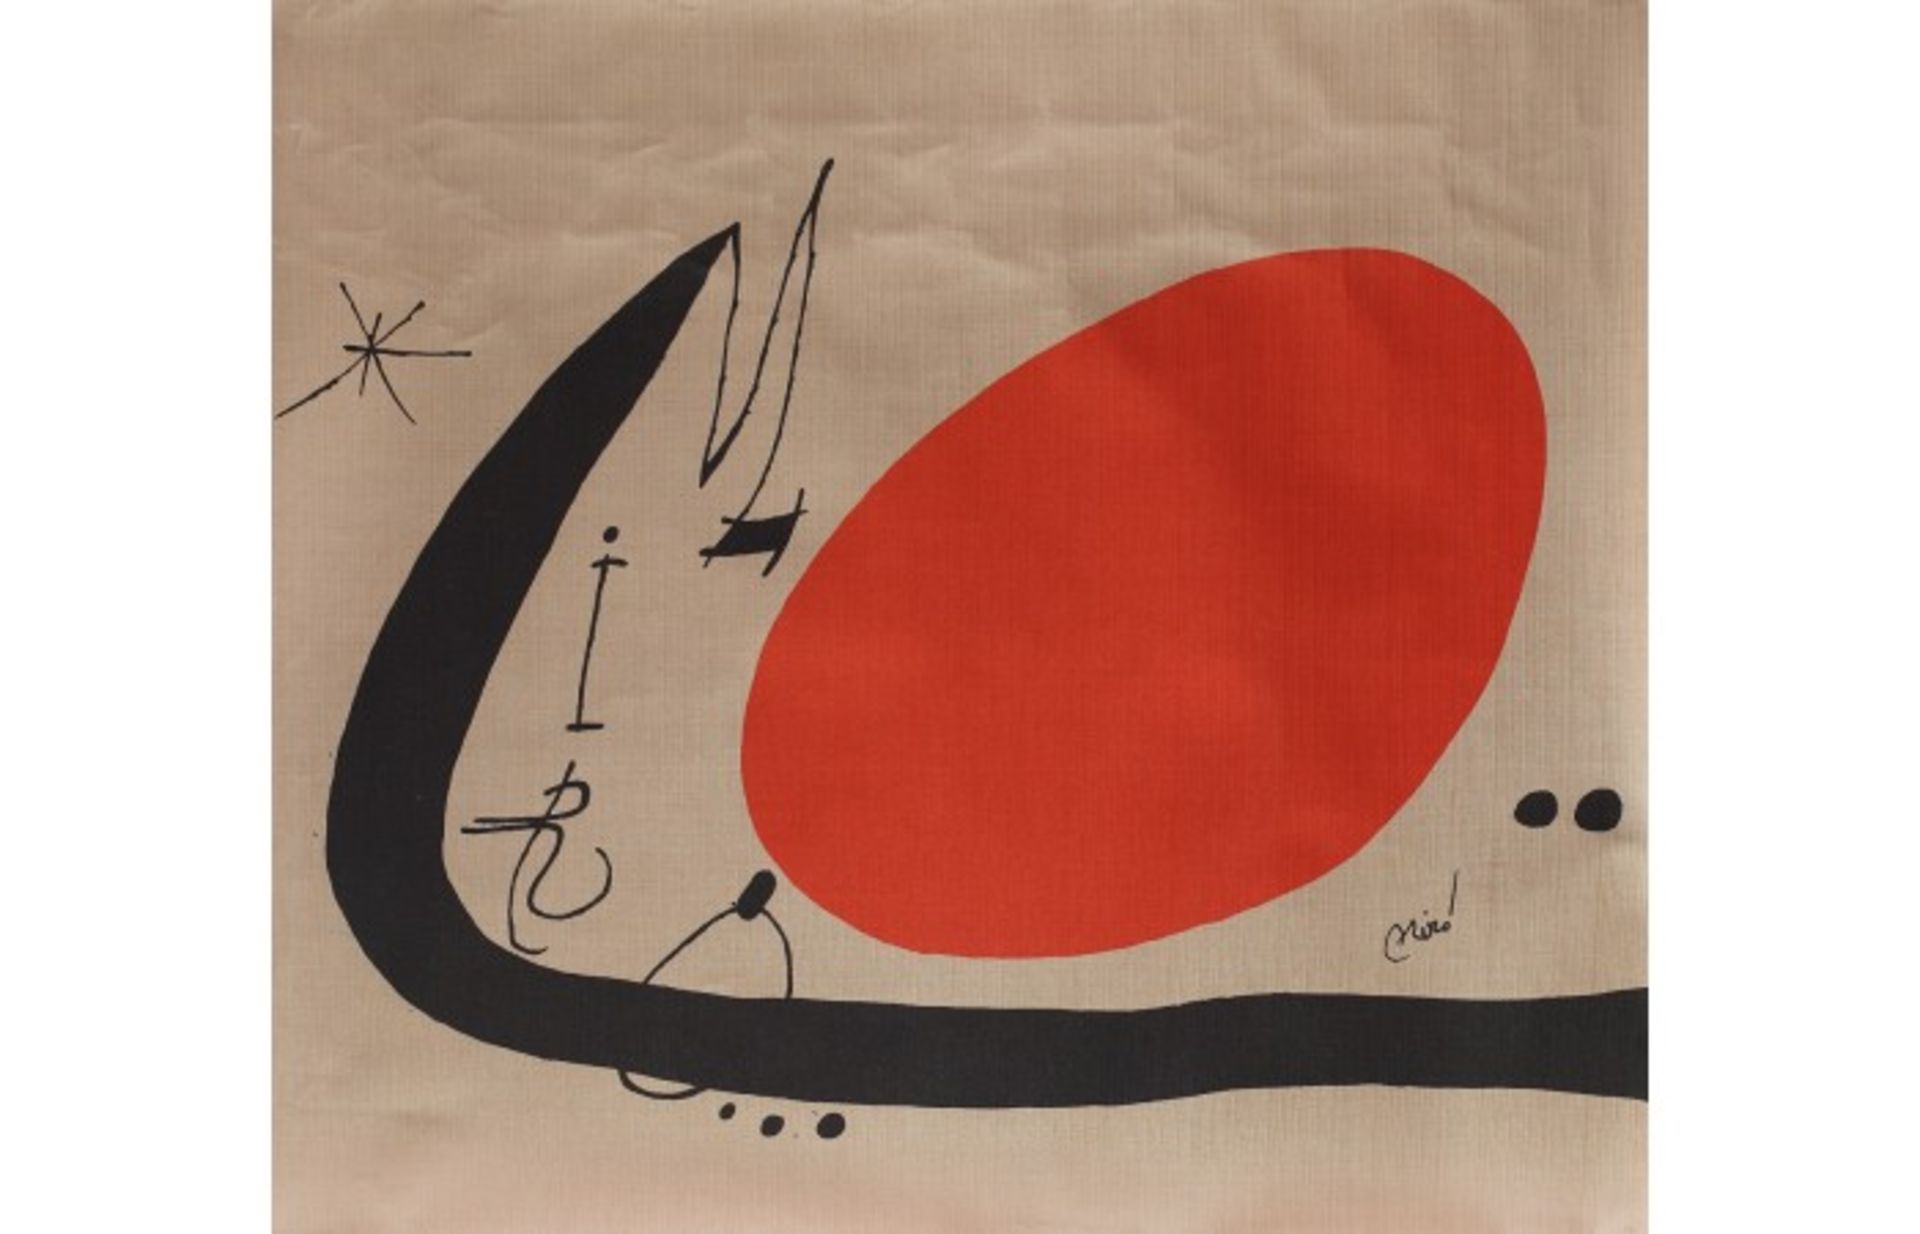 Ma de Proverbis Joan Miro Original lithograph in colors on Arches paper68 x 76.5cm Signed bottom